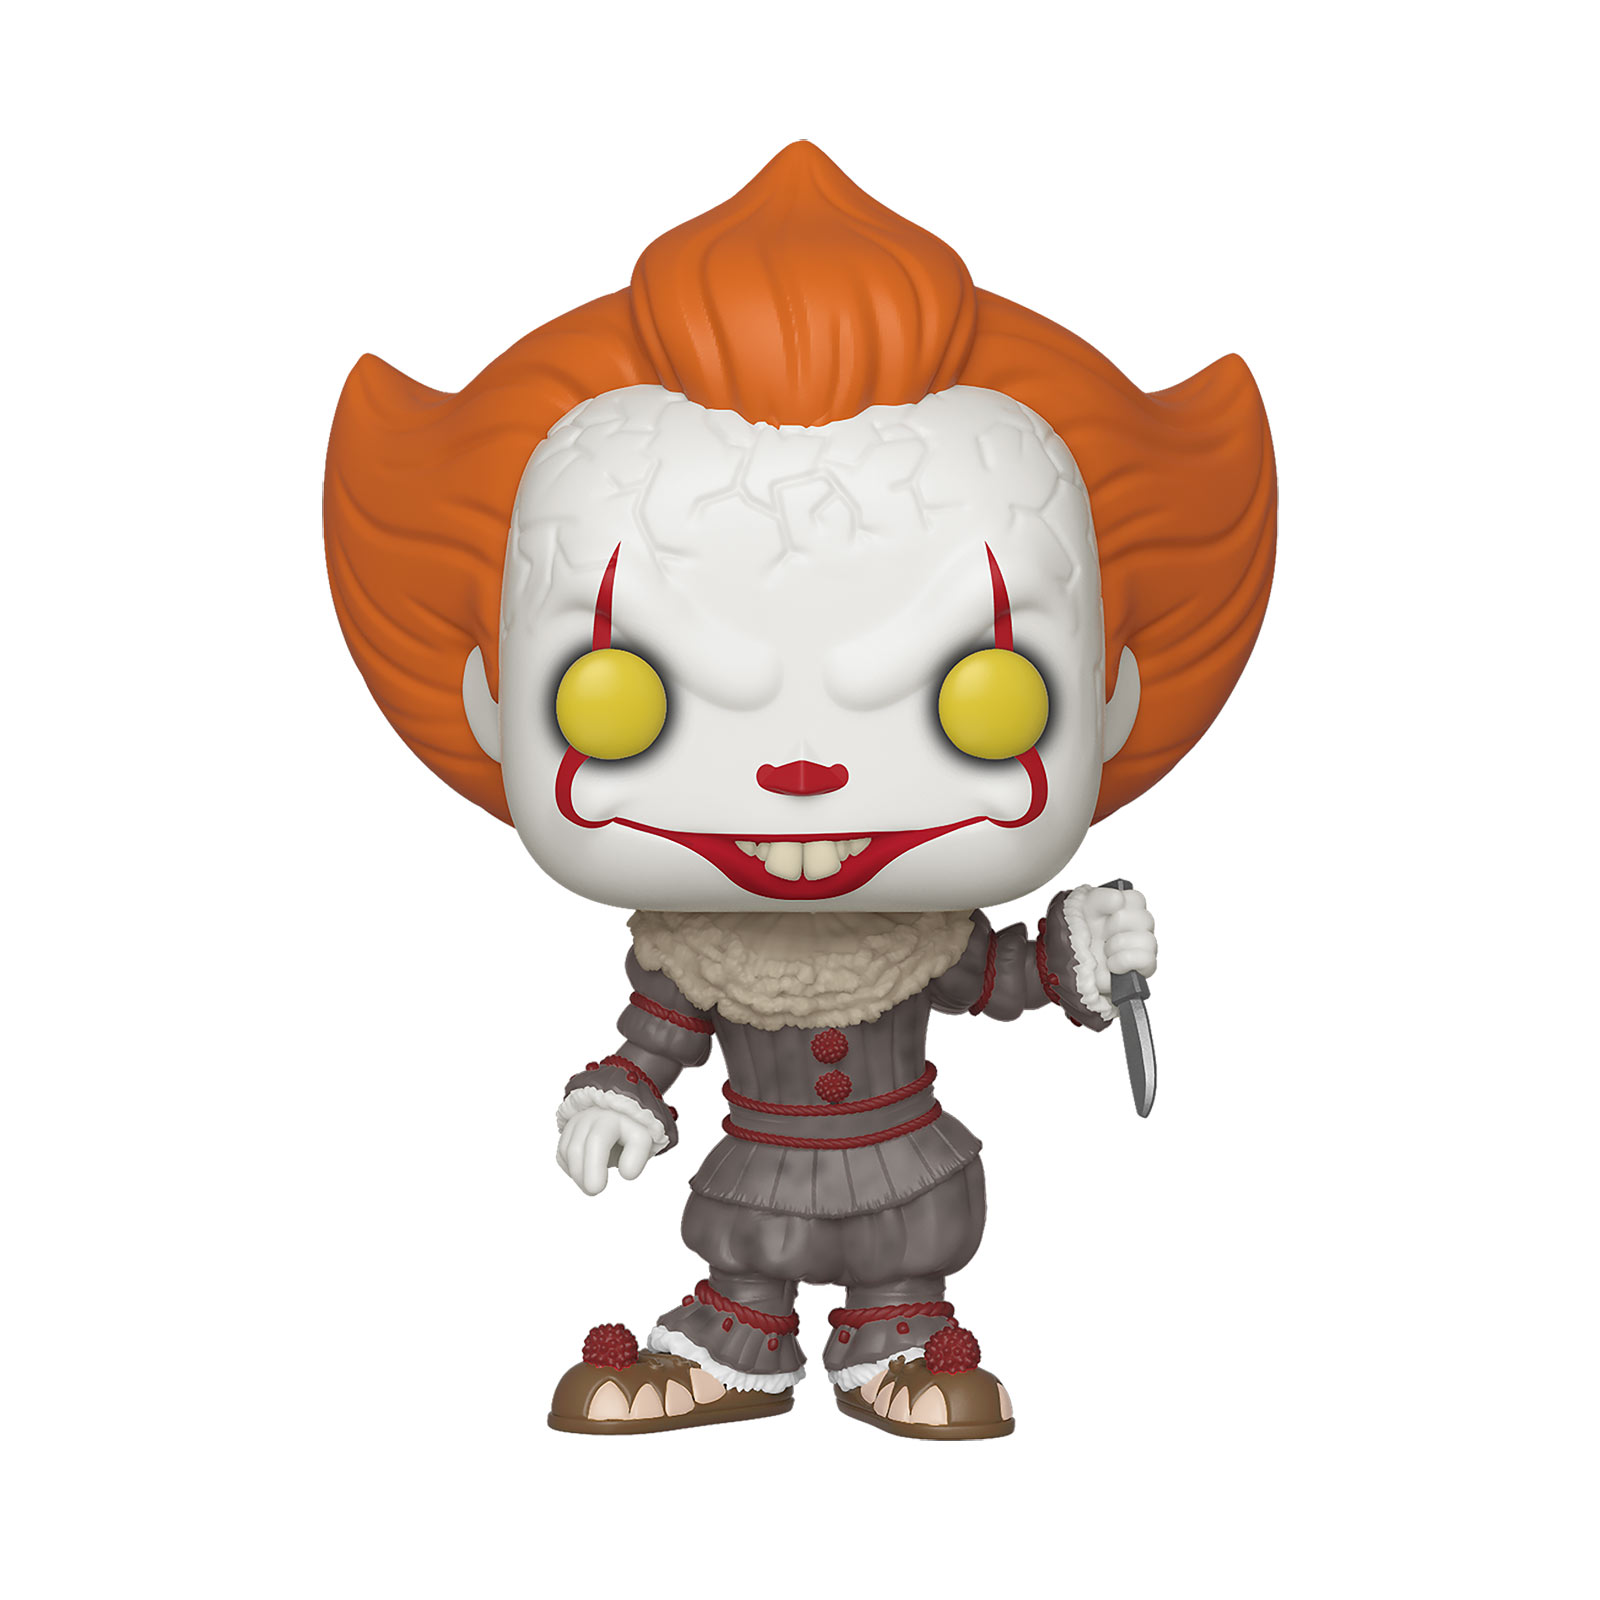 Stephen King's ES - Pennywise with knife Funko Pop Figurine